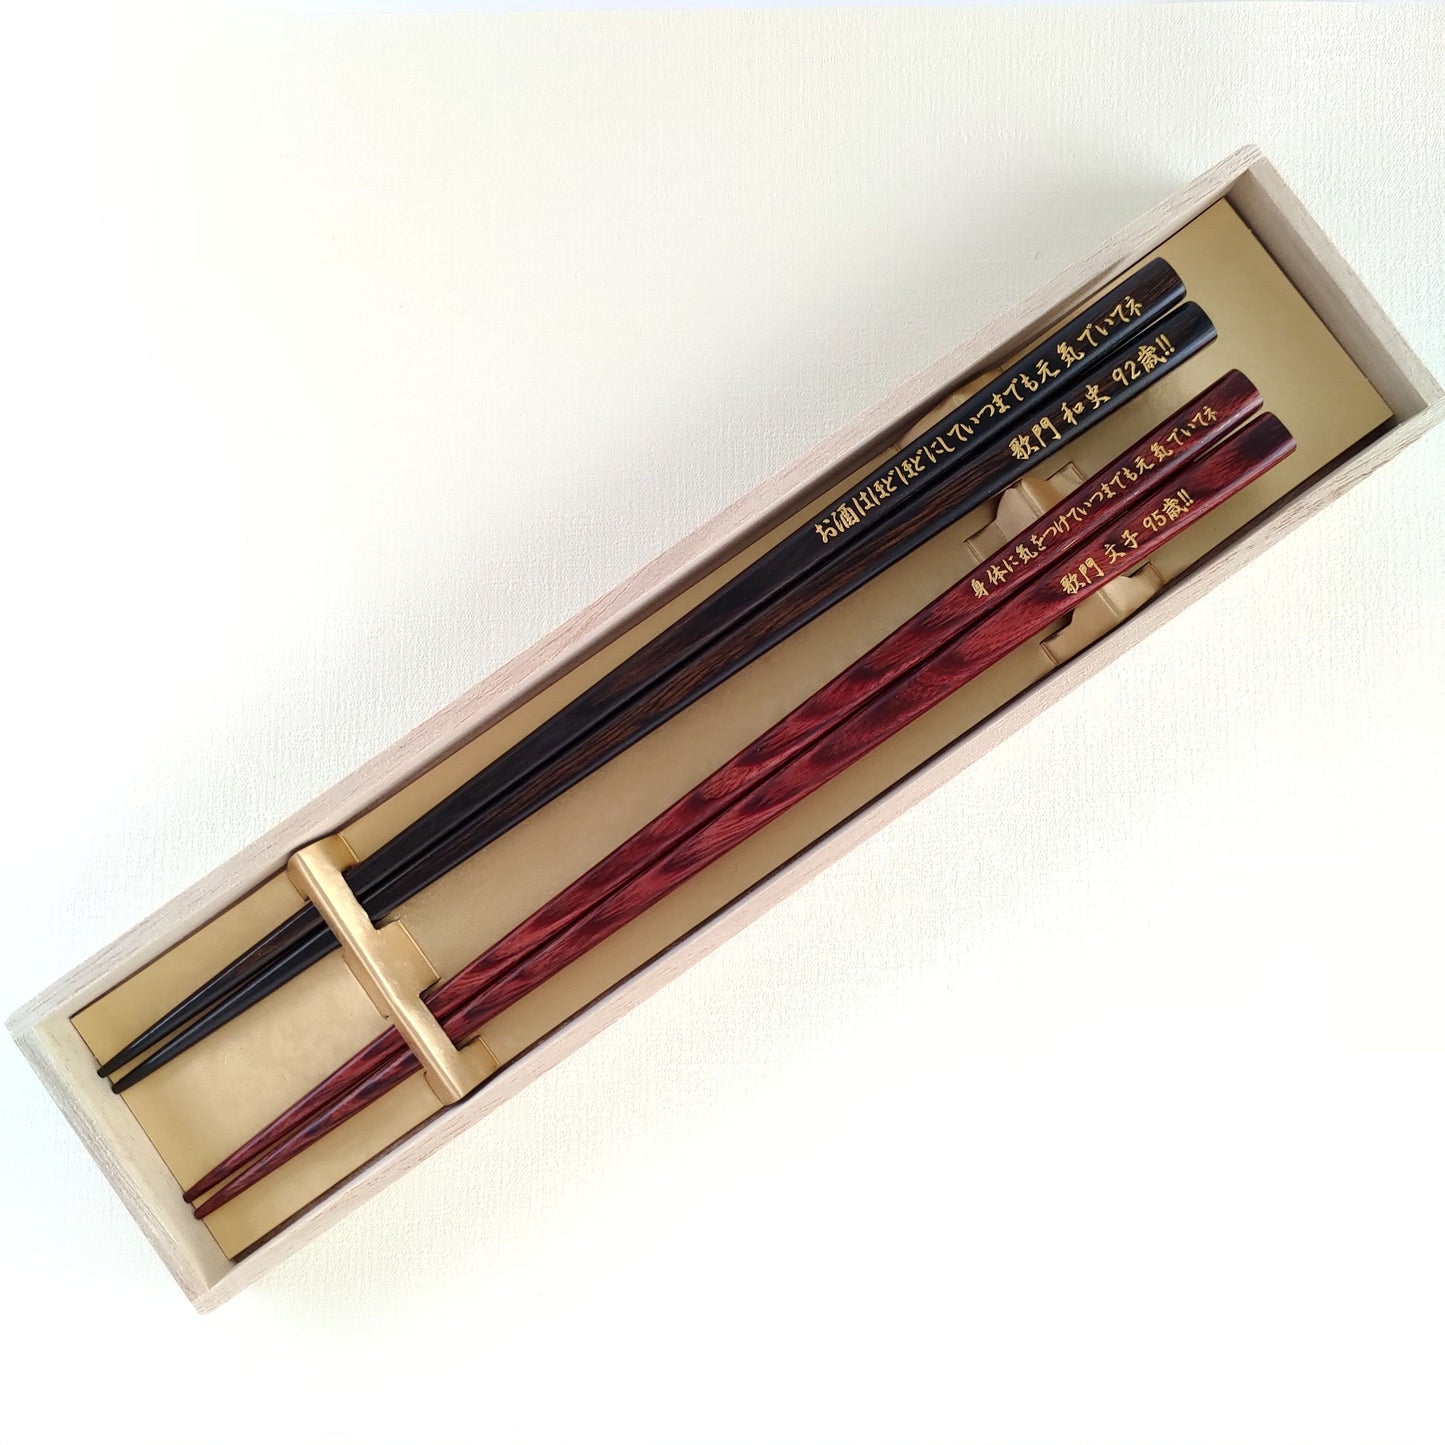 Awesome Japanese chopsticks with soft fur design black brown - DOUBLE PAIR WITH ENGRAVED WOODEN BOX SET